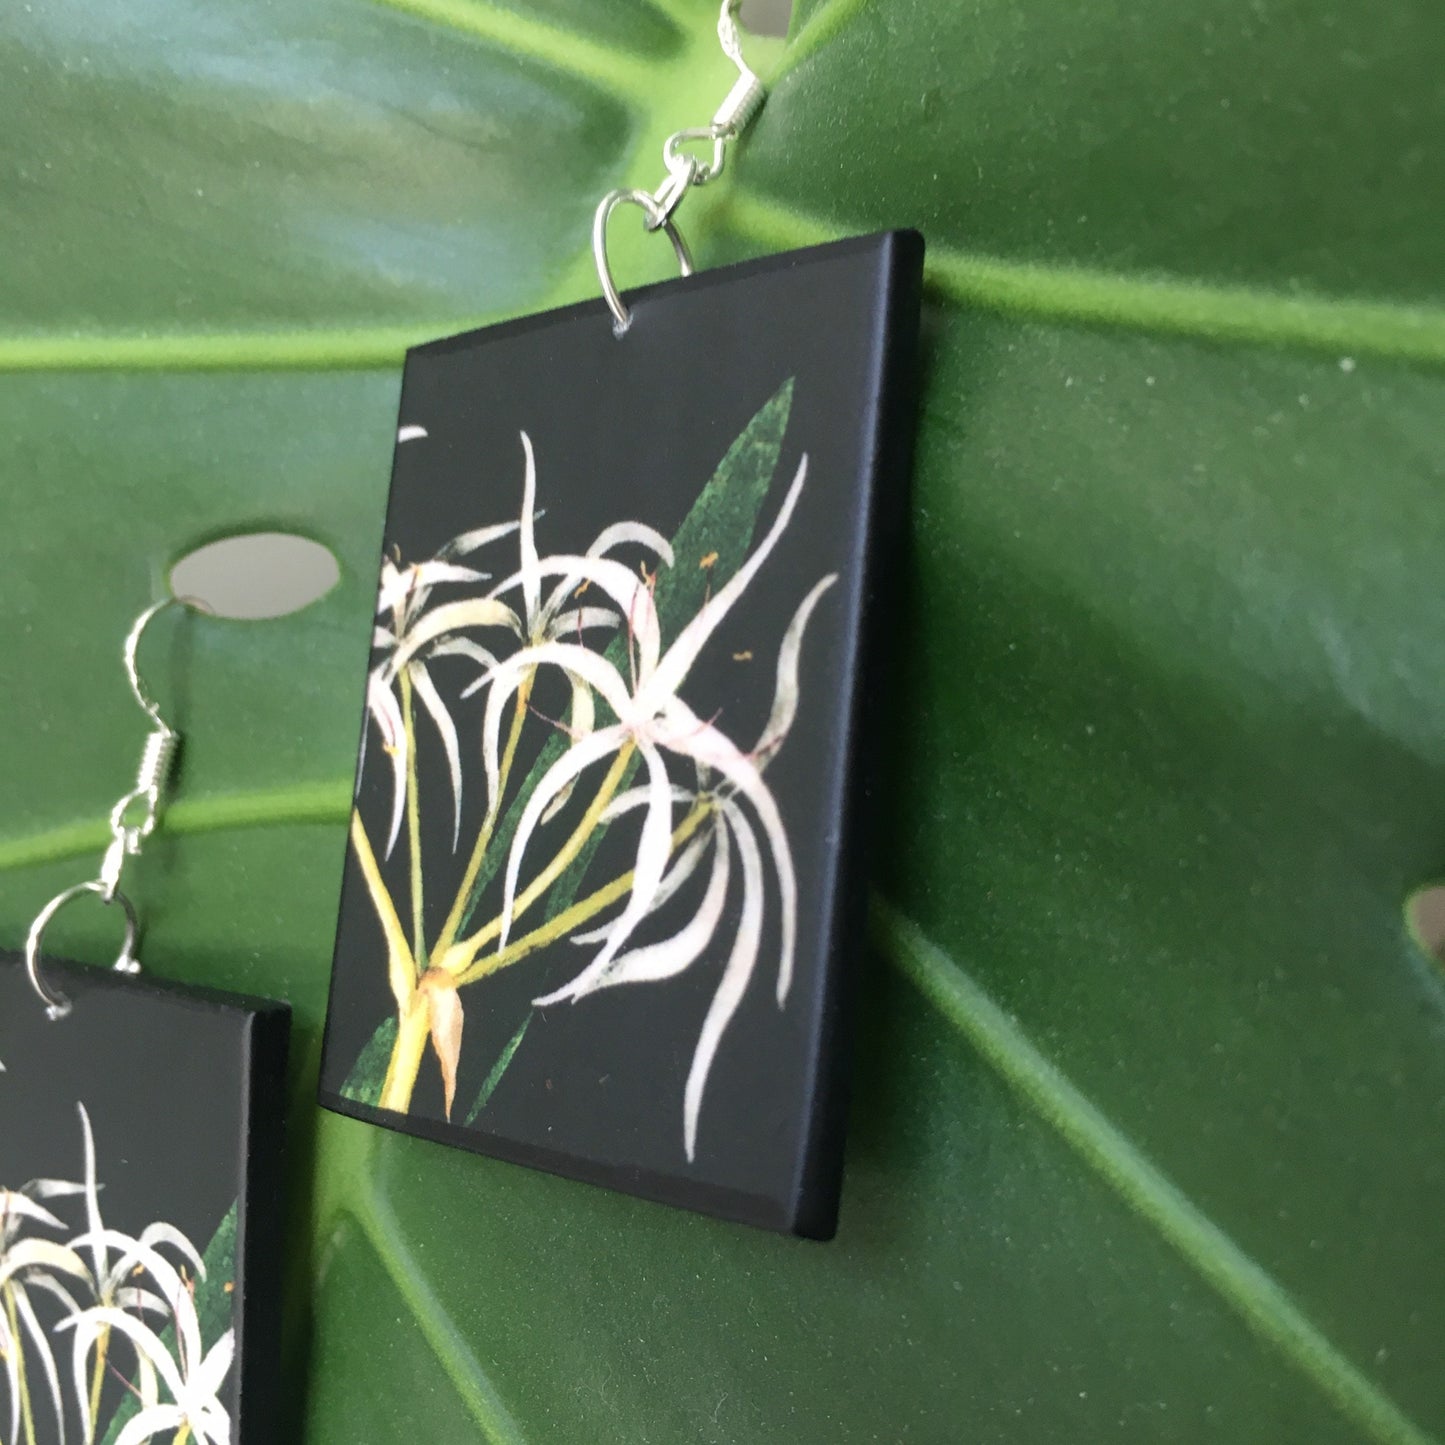  earrings on sustainable wood with a figurative floral detail from a collage by famous English artist Mary Delany.